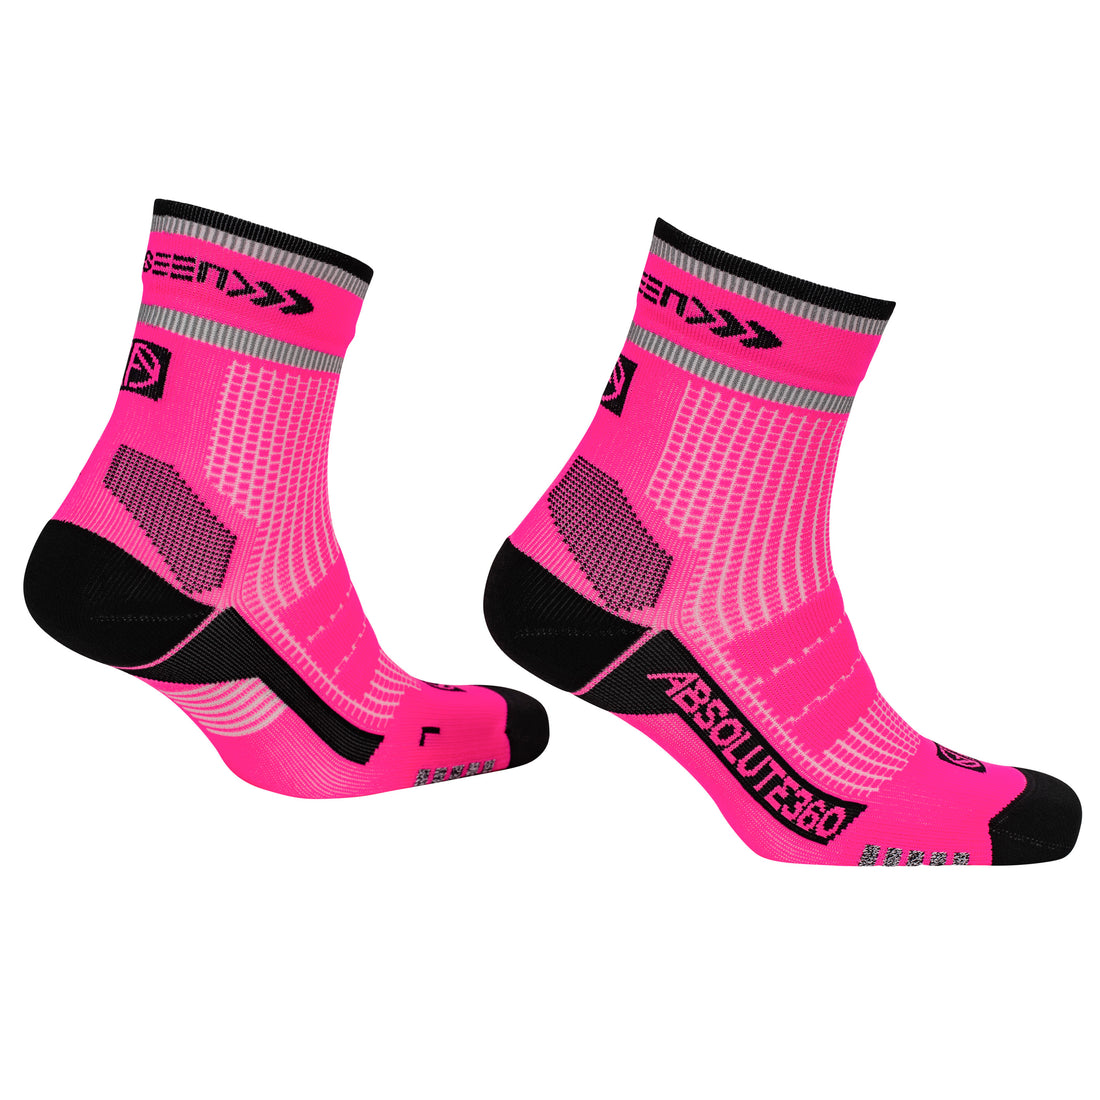 Absolute 360 [Be Seen] Performance Reflective Running Socks